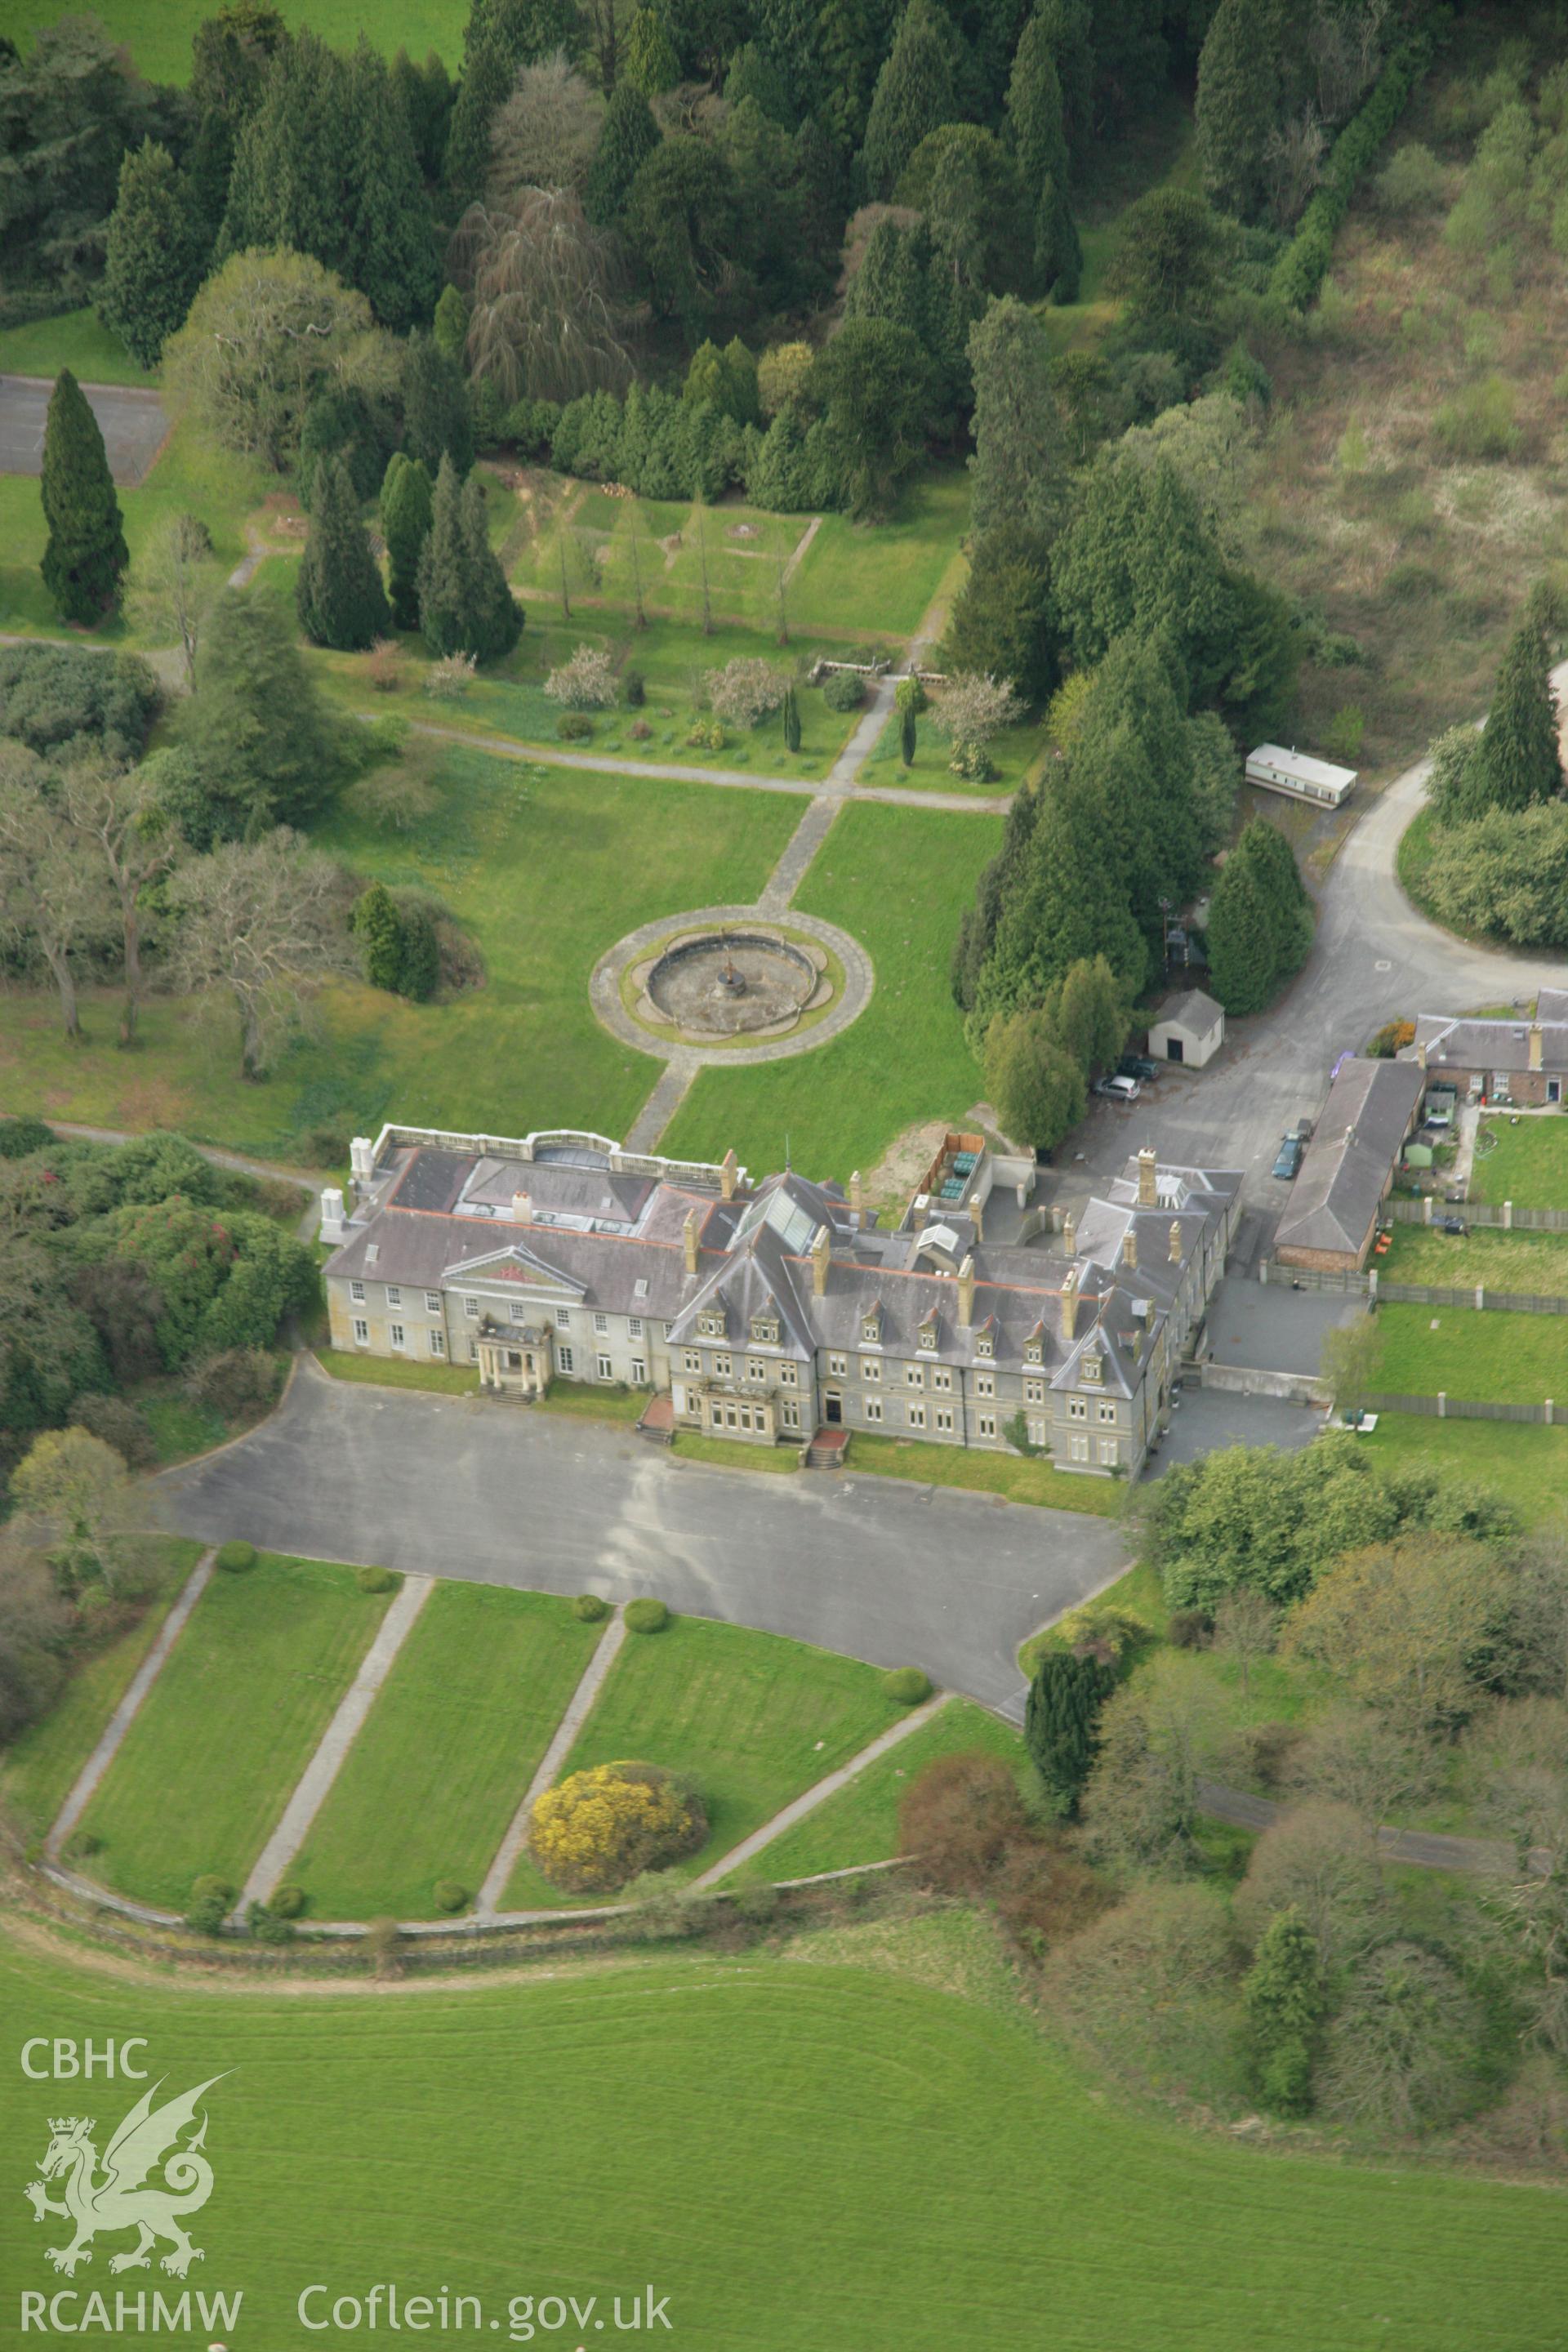 RCAHMW colour oblique aerial photograph of Trawsgoed Mansion. Taken on 17 April 2007 by Toby Driver